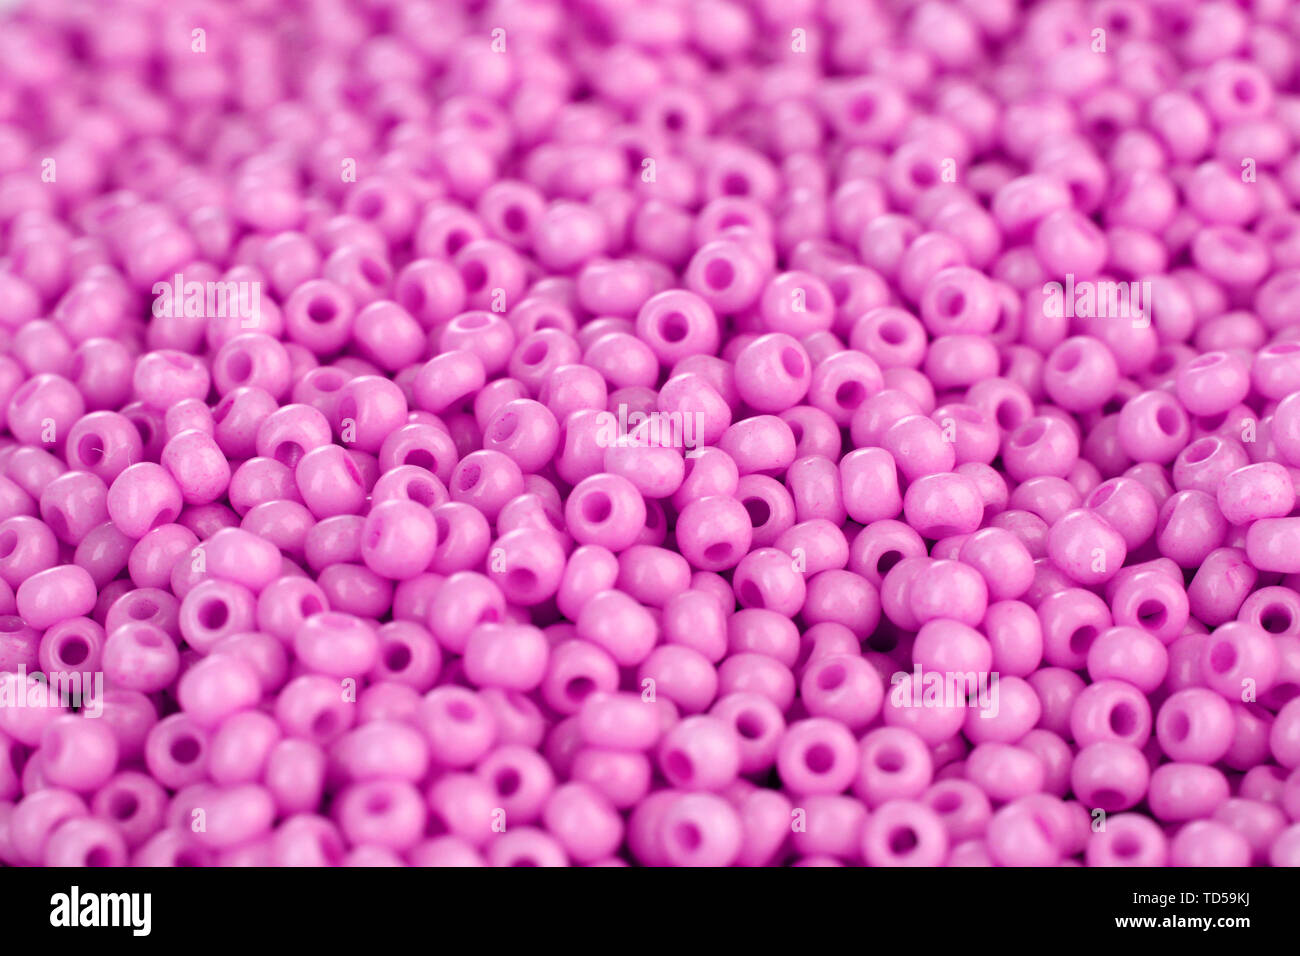 Pink Beads Macro Background Stock Photo, Picture and Royalty Free Image.  Image 2611544.